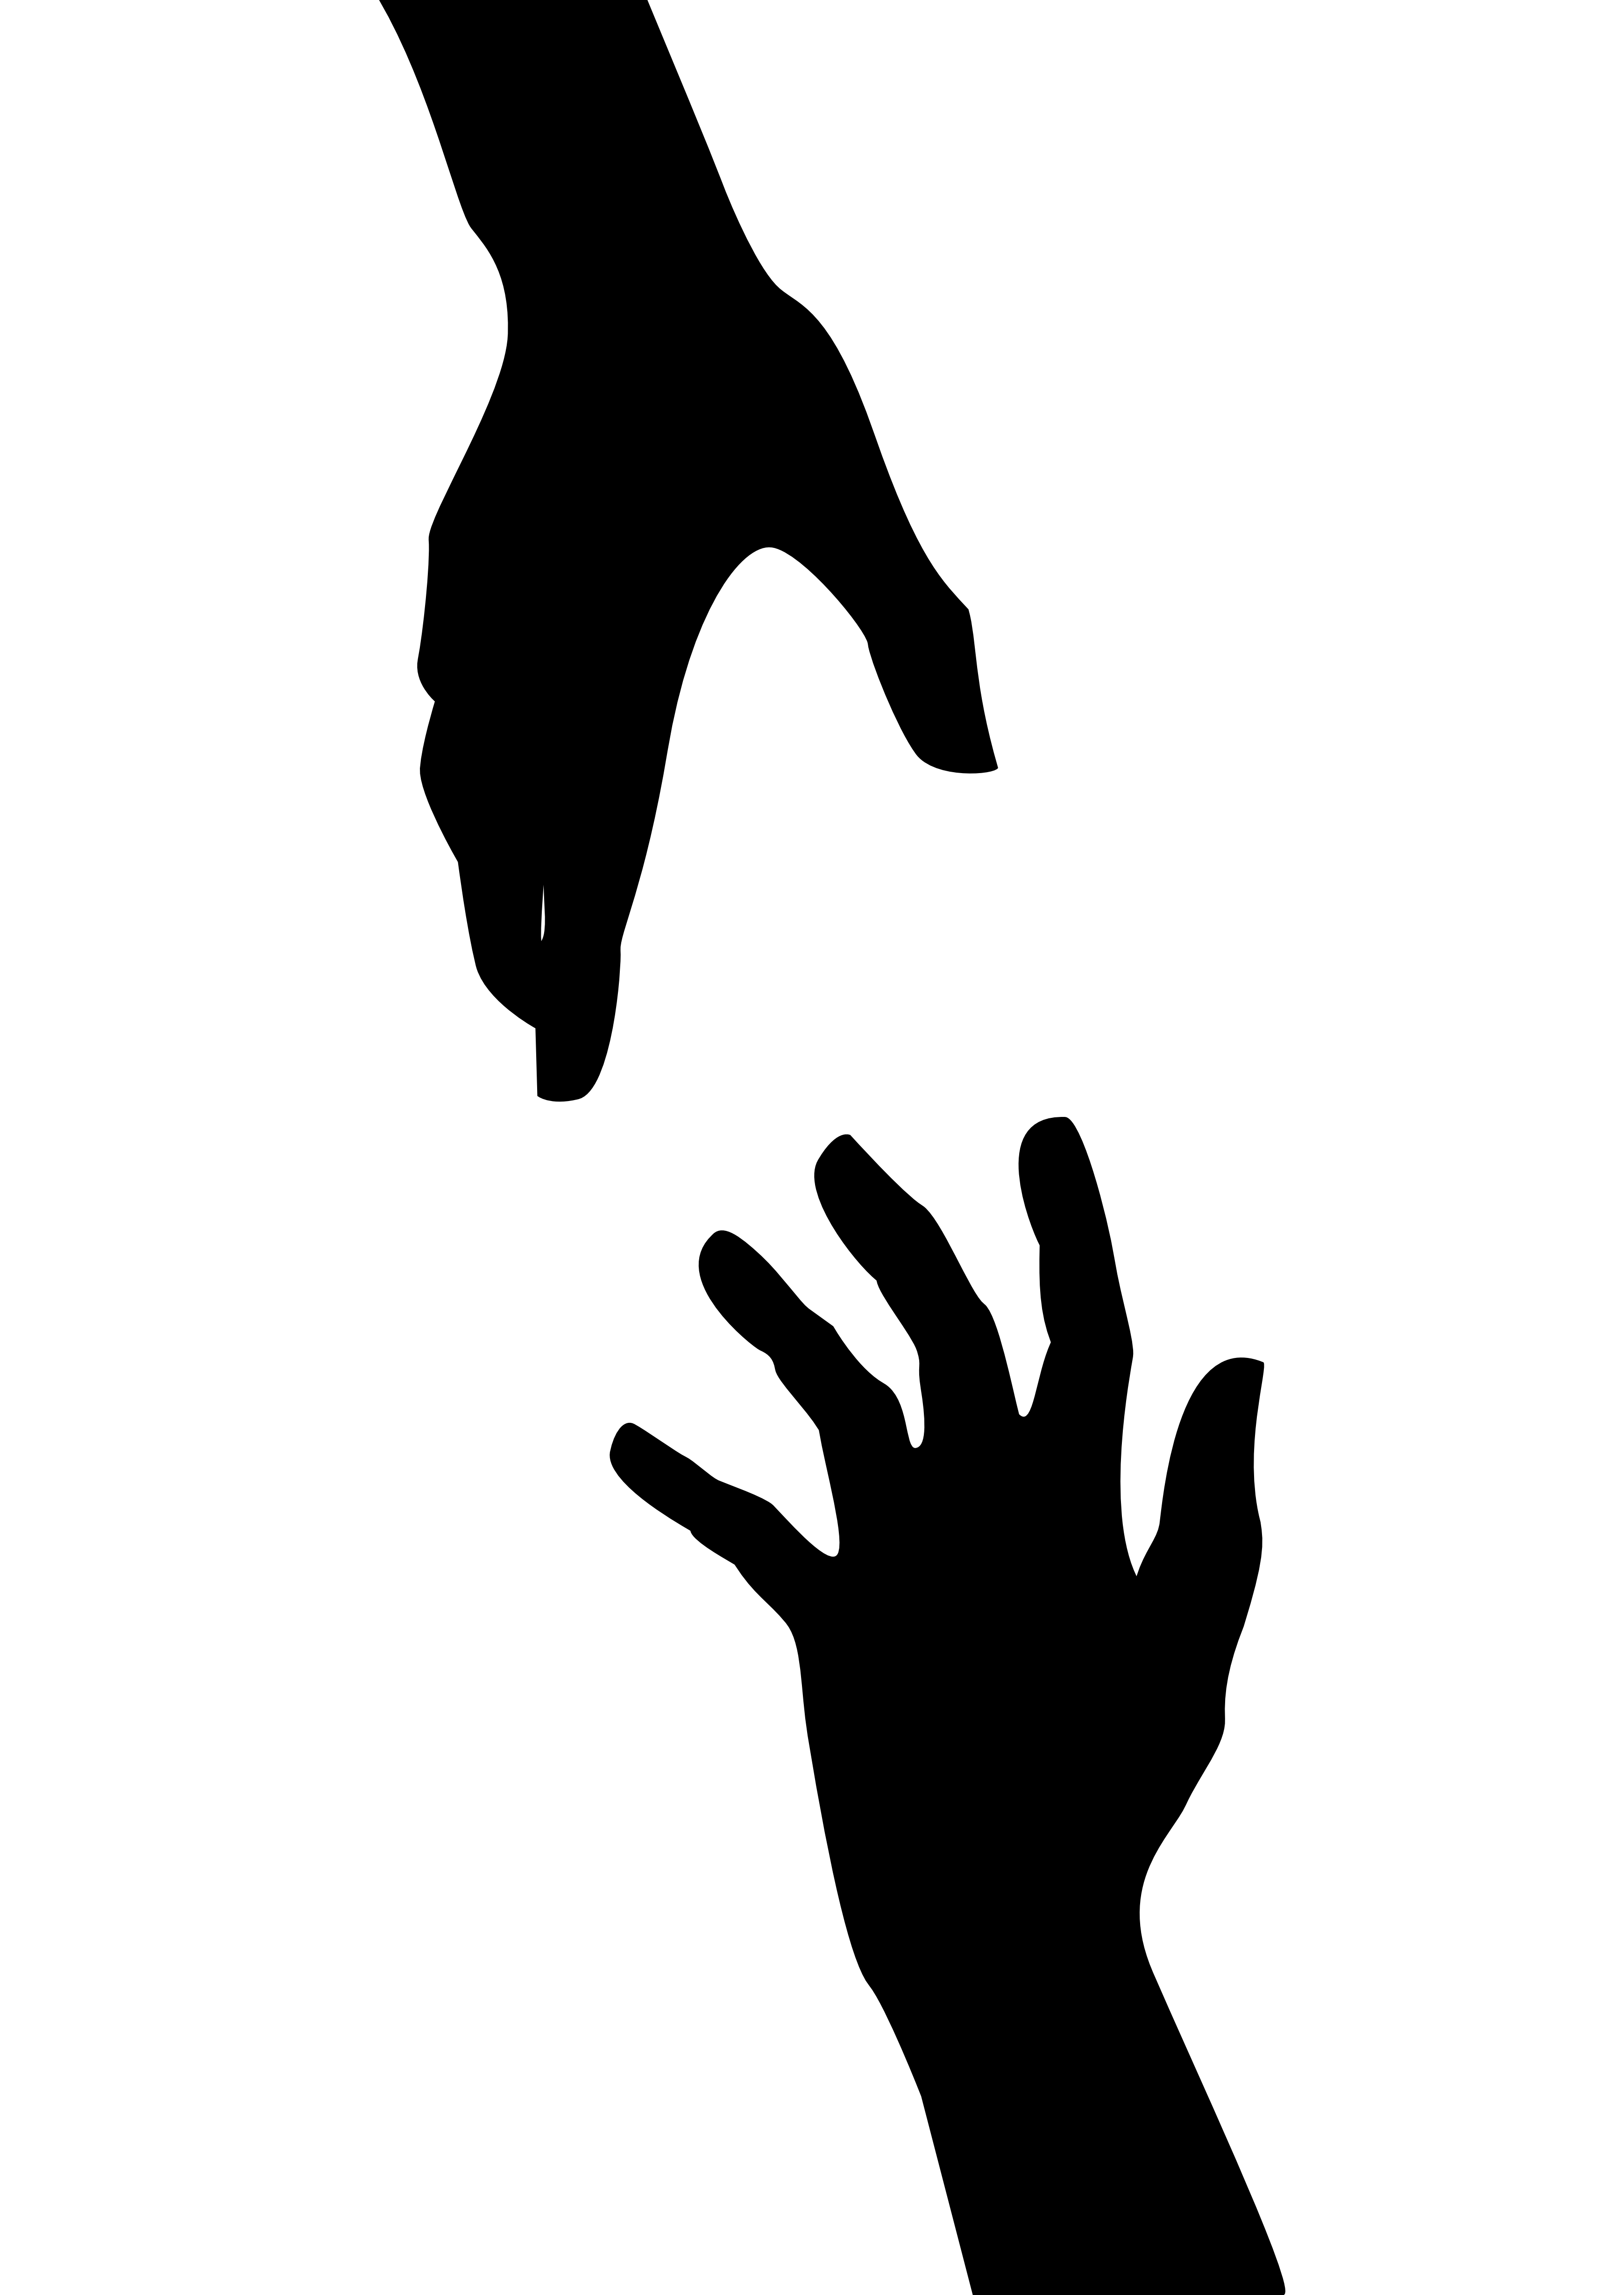 Free Hand Reaching Cliparts, Download Free Clip Art, Free.